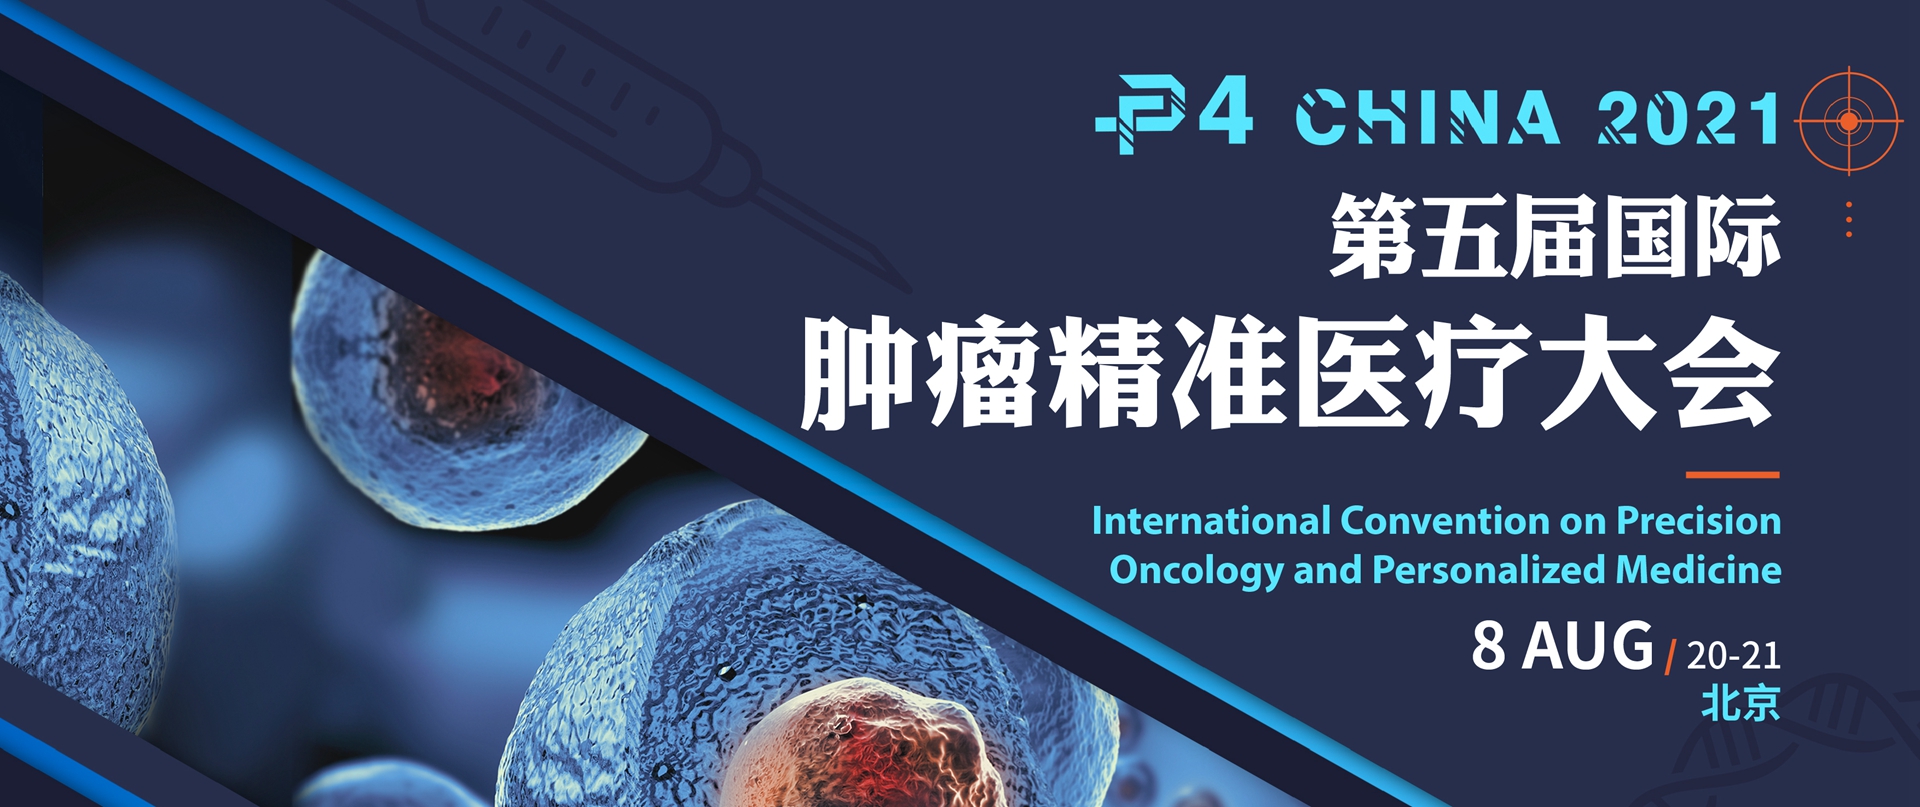 5th International Convention on Precision Oncology-Detection and Personalized Medicine